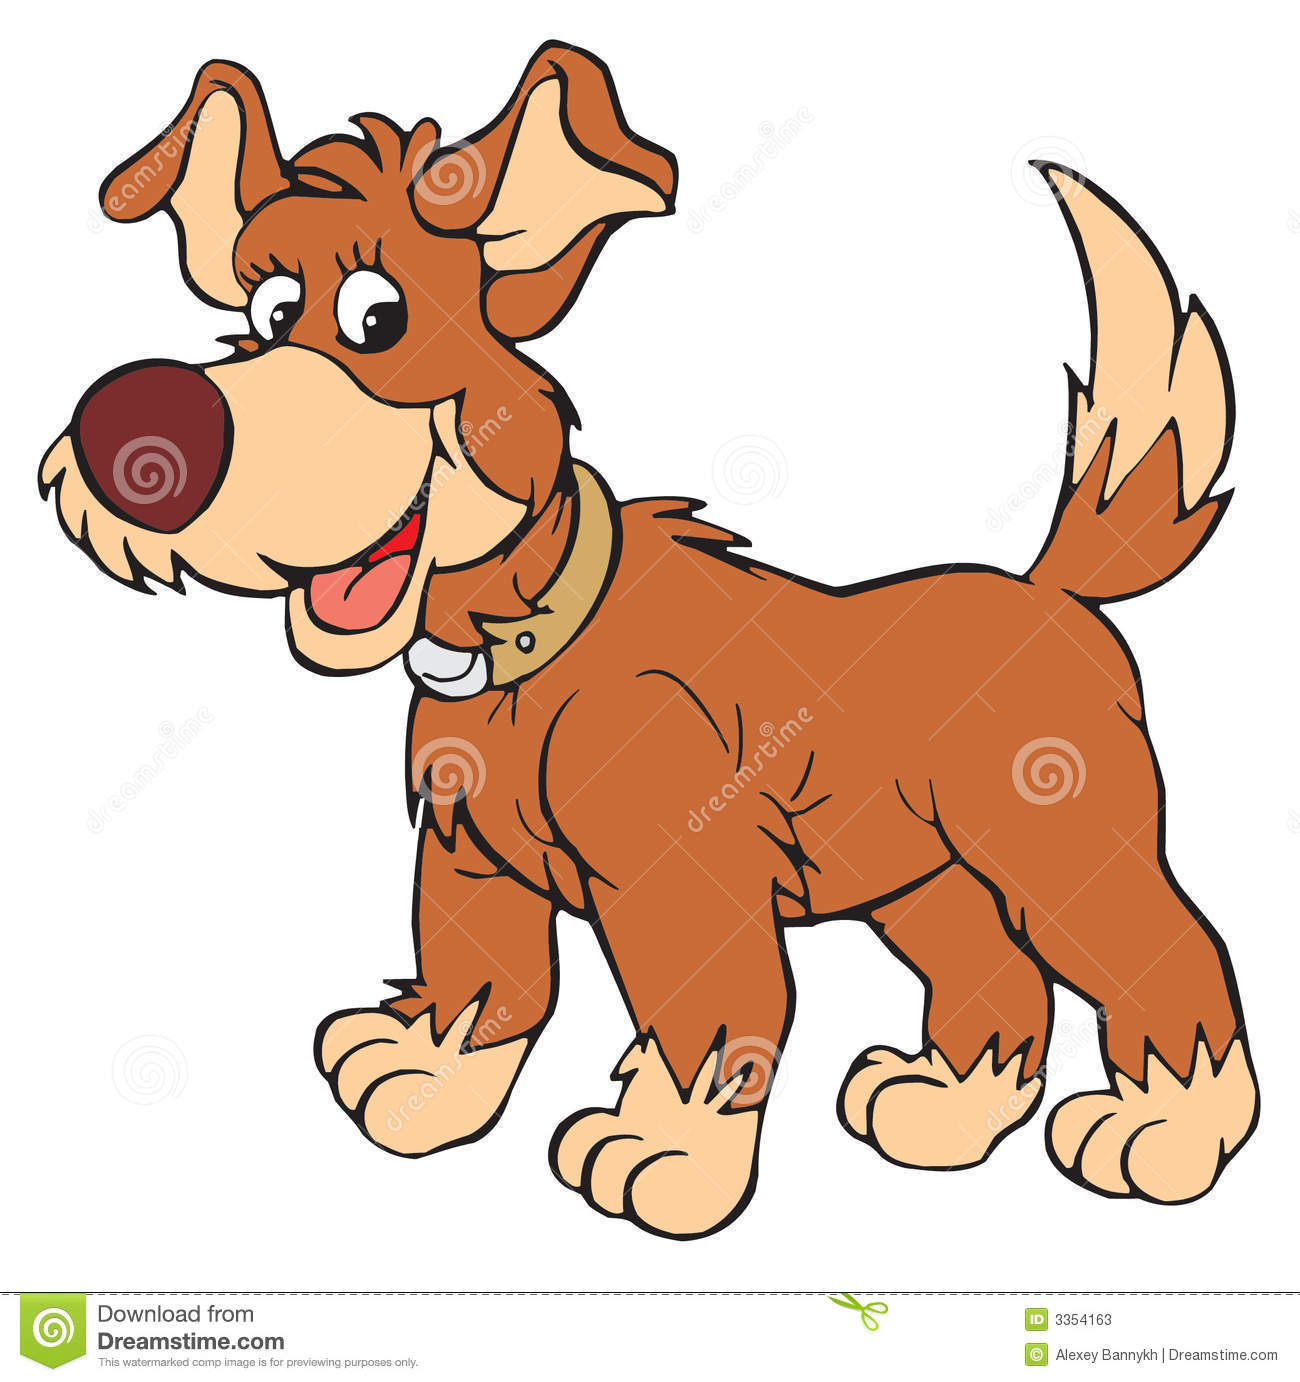 Dog and pup vector clip art royalty free stock photo image